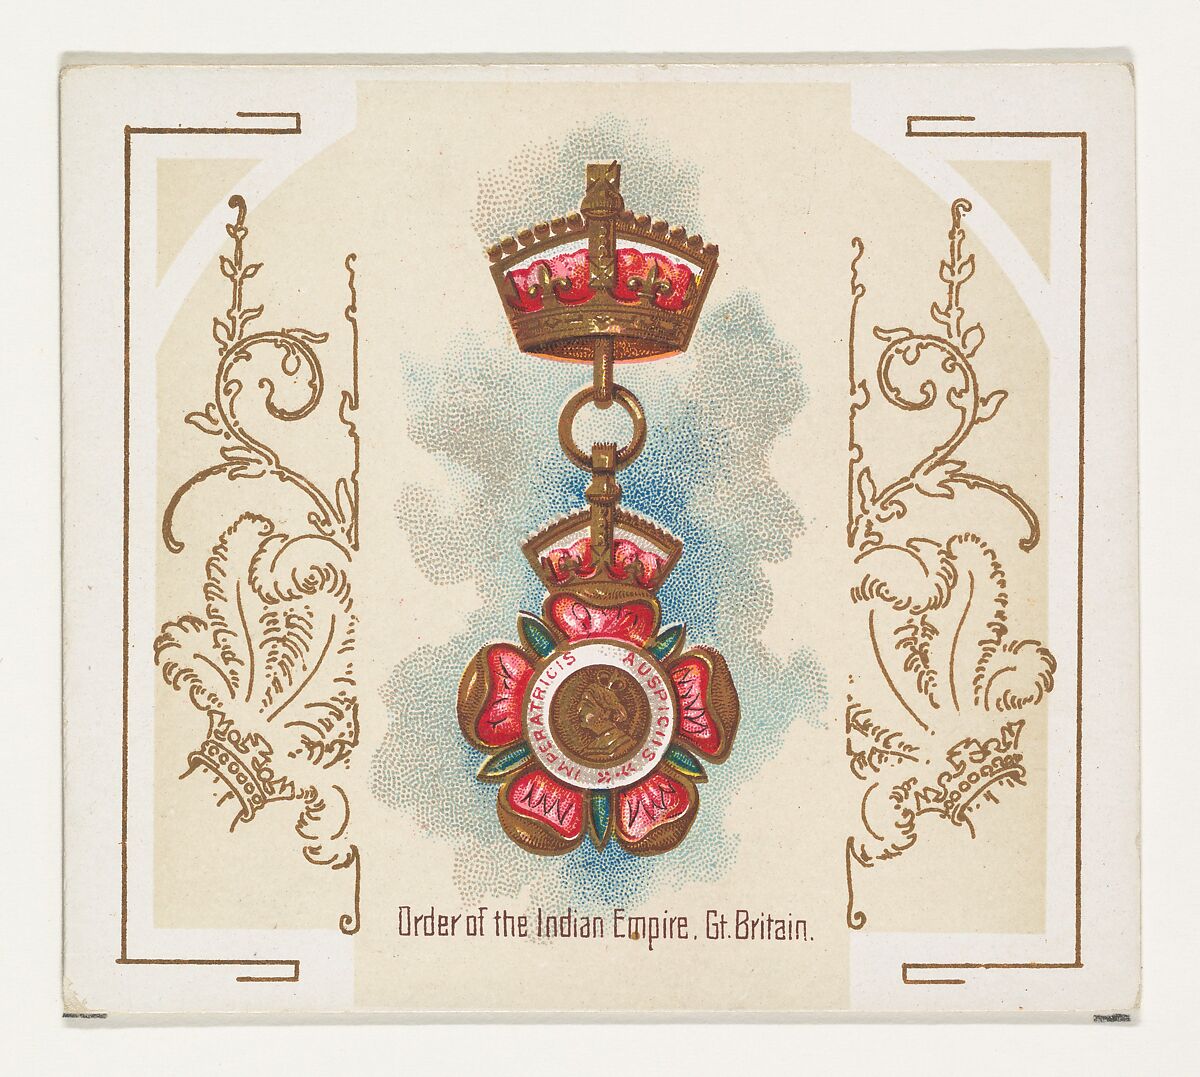 Order of the Indian Empire, Great Britain, from the World's Decorations series (N44) for Allen & Ginter Cigarettes, Issued by Allen &amp; Ginter (American, Richmond, Virginia), Commercial color lithograph 